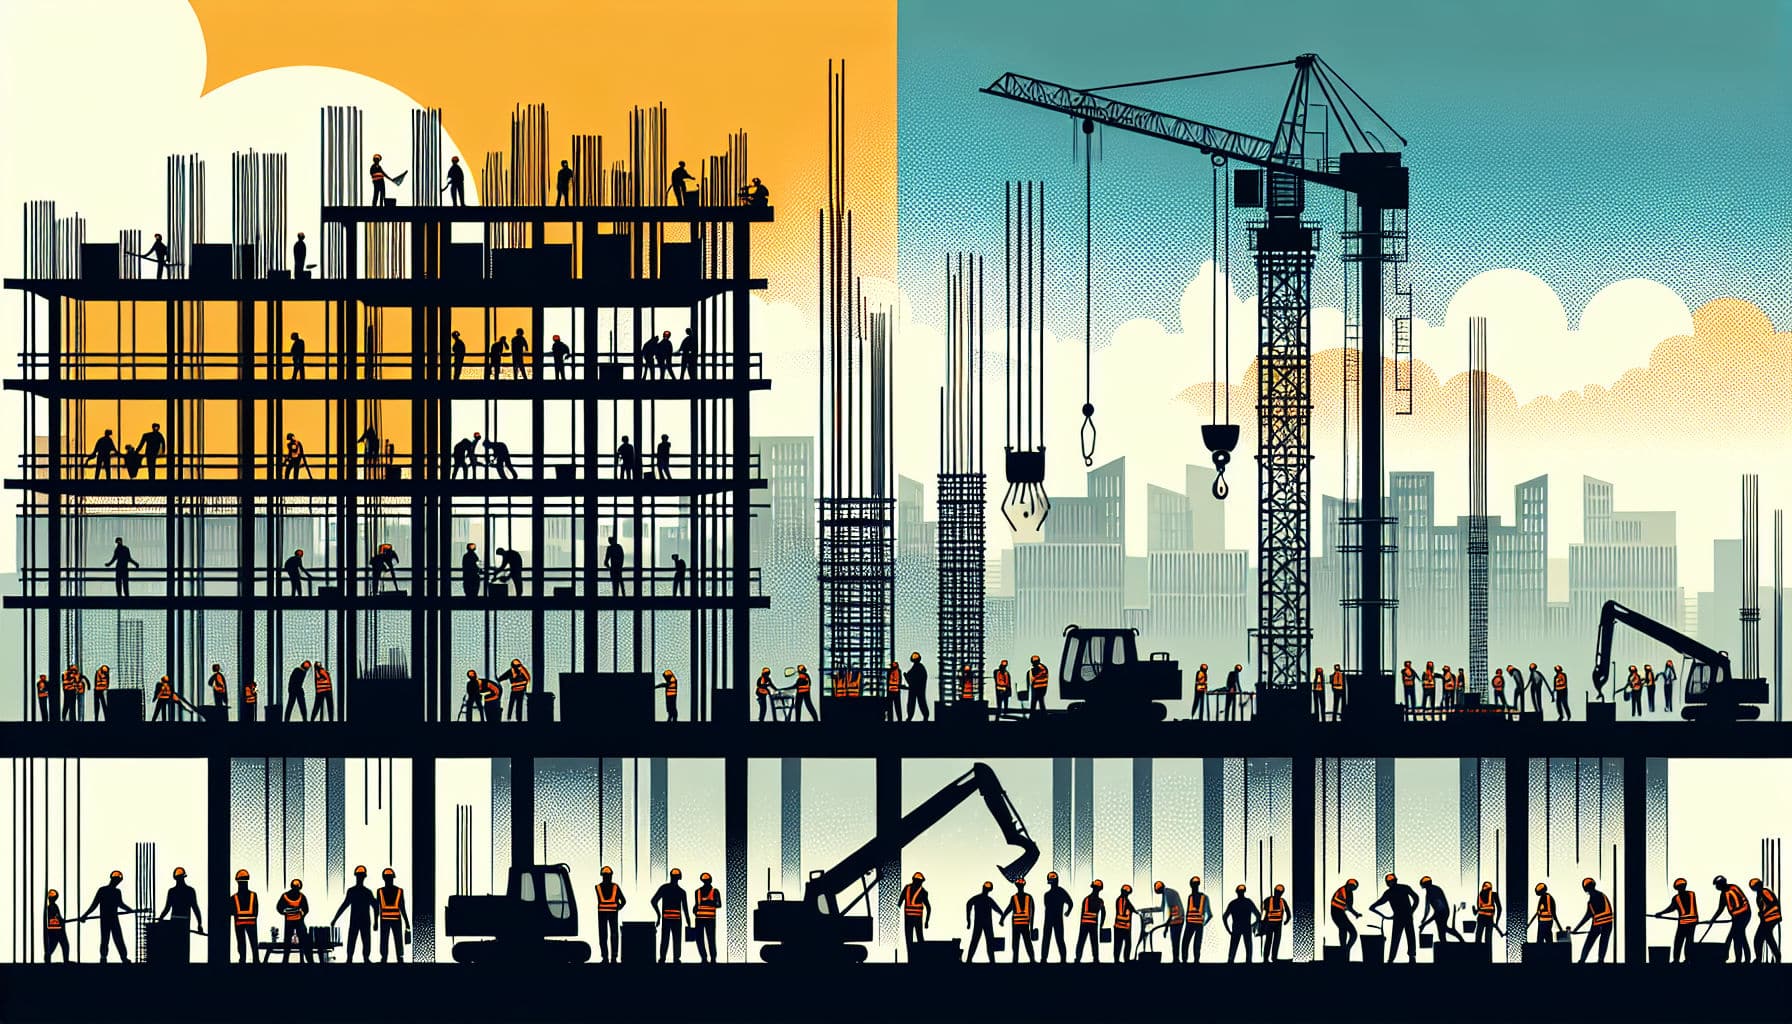 Illustration of a commercial construction site following construction site rules example